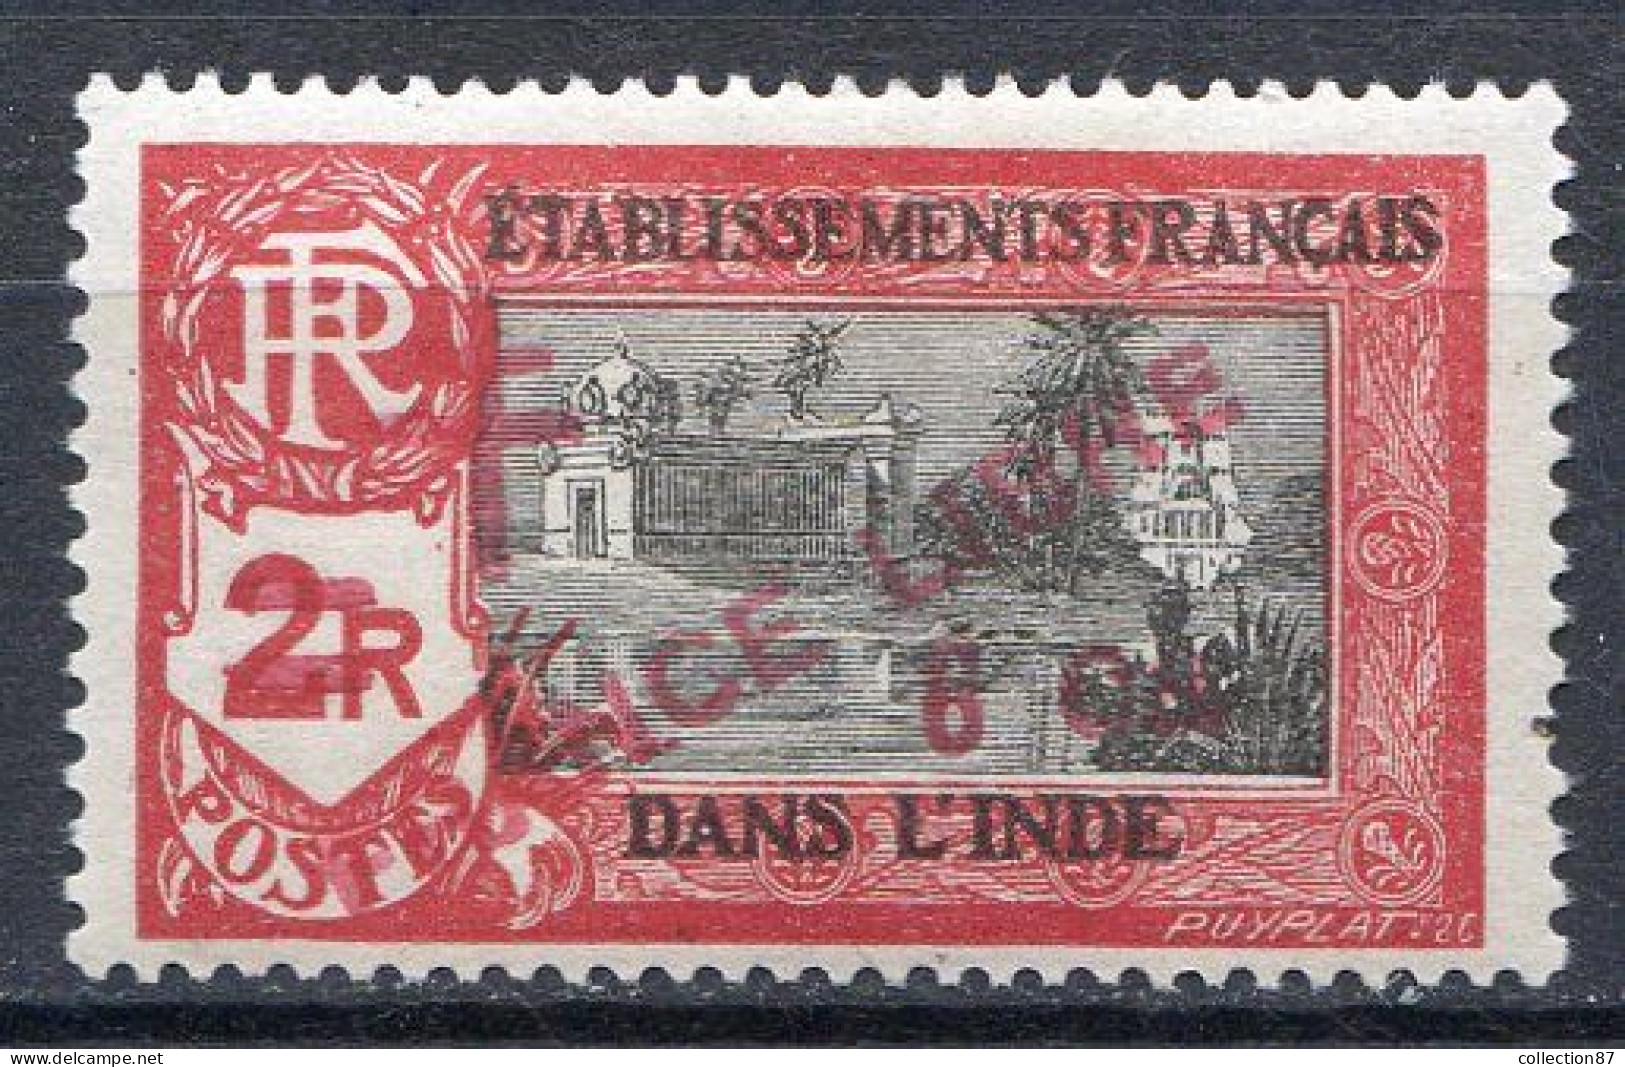 Réf 75 CL2 < -- INDE - FRANCE LIBRE < N° 203 * NEUF Ch.Dos Visible MH * - Ongebruikt